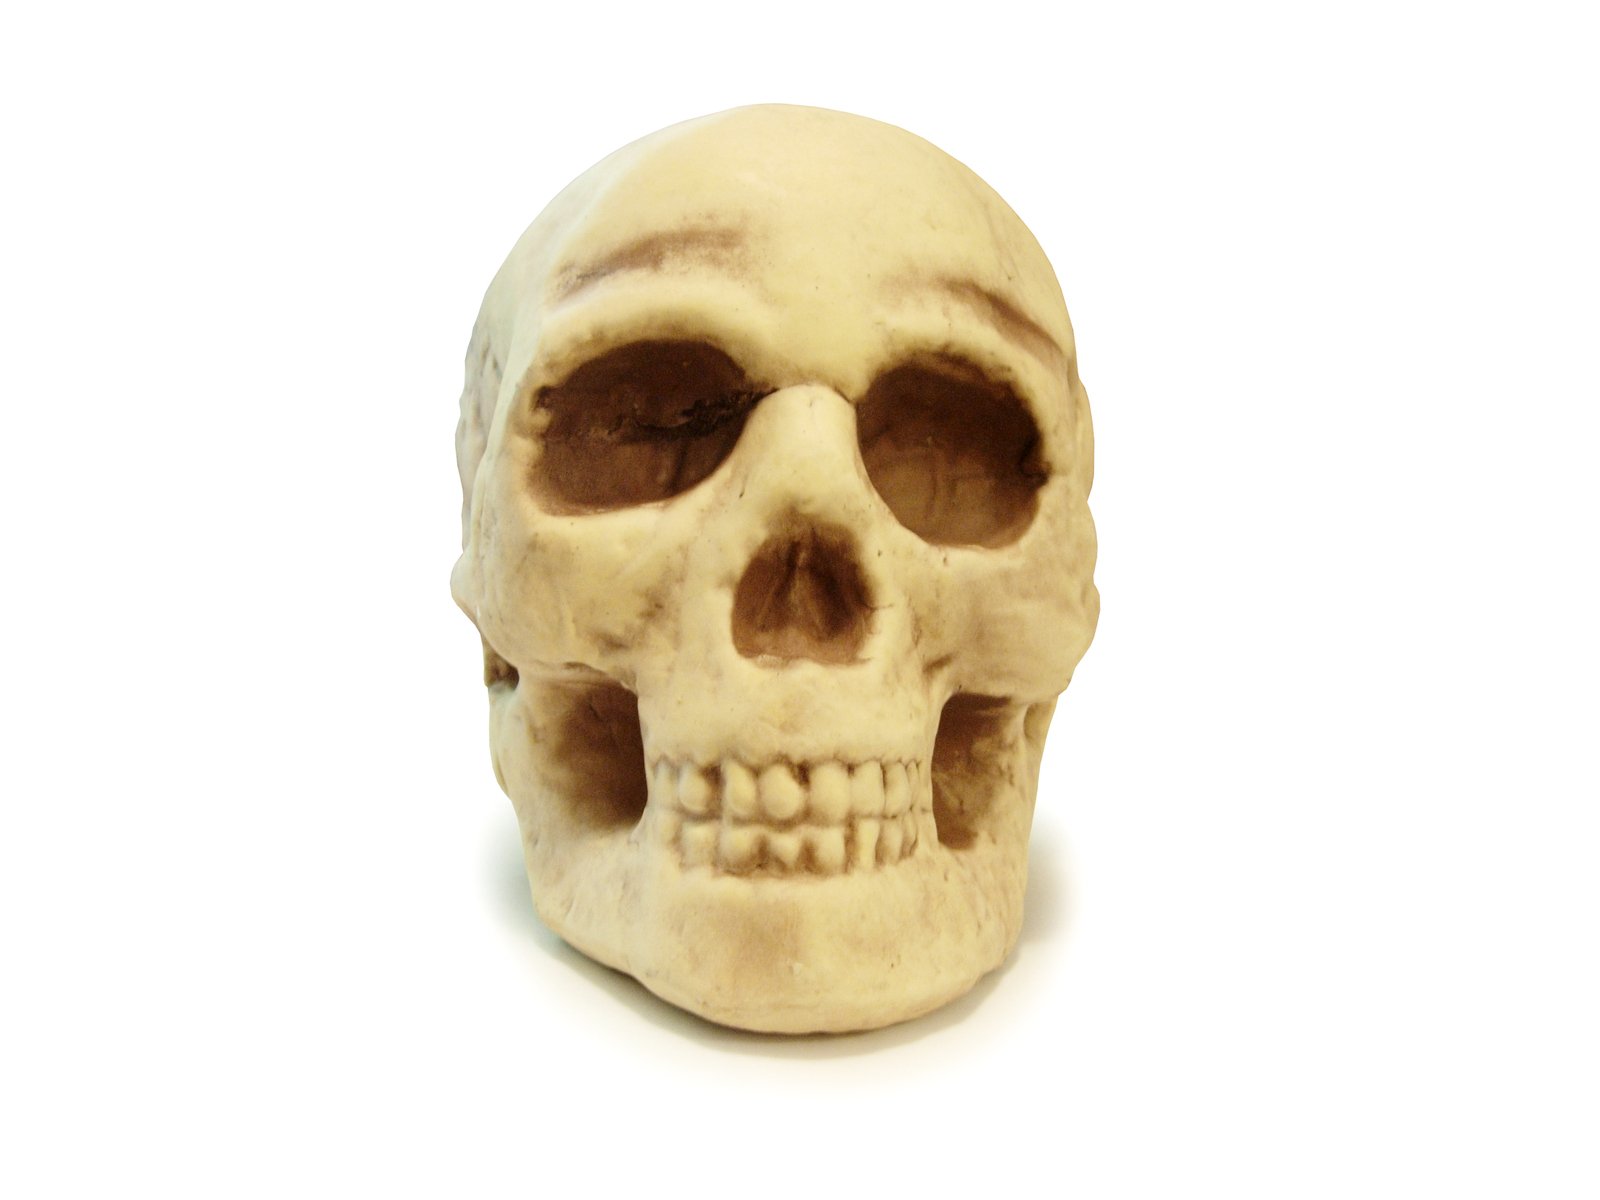 a carved white human skull with no teeth